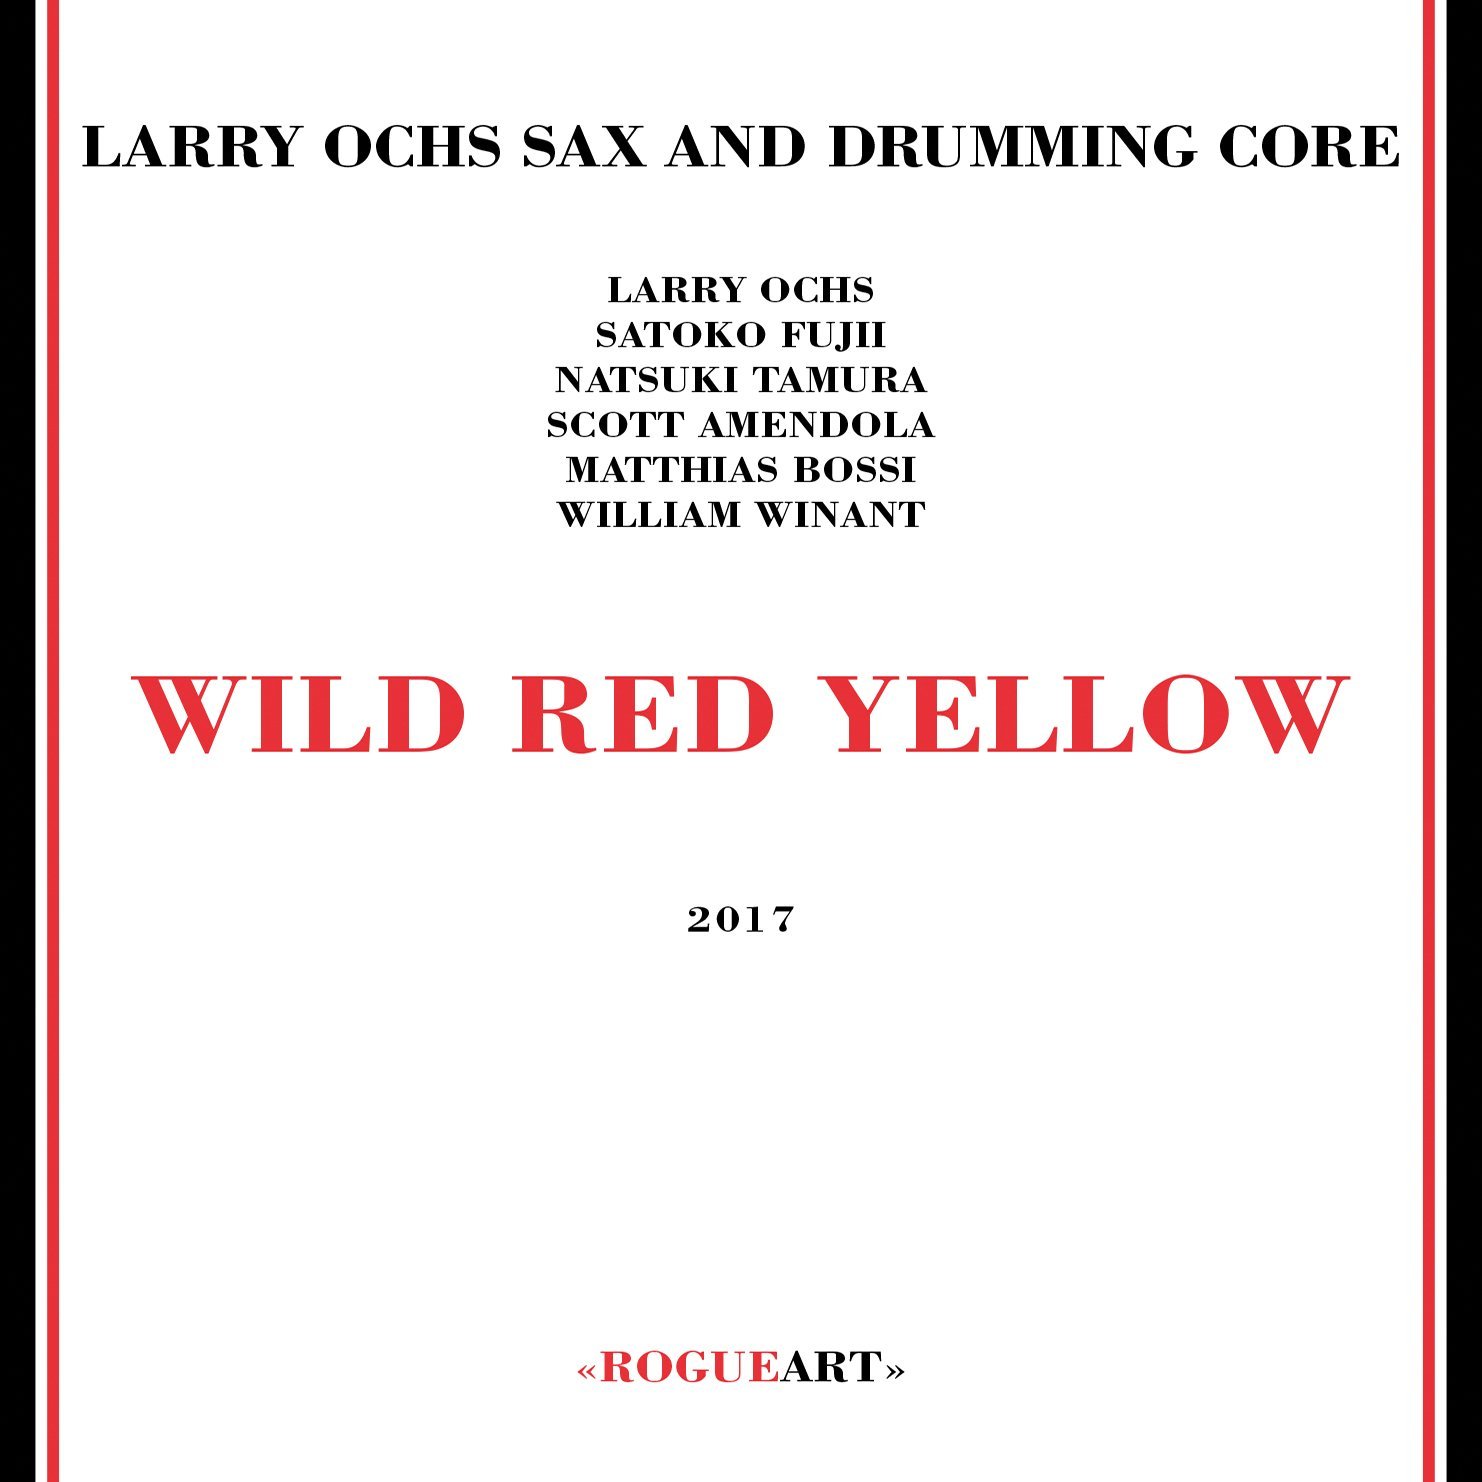 LARRY OCHS - Wild Red Yellow cover 